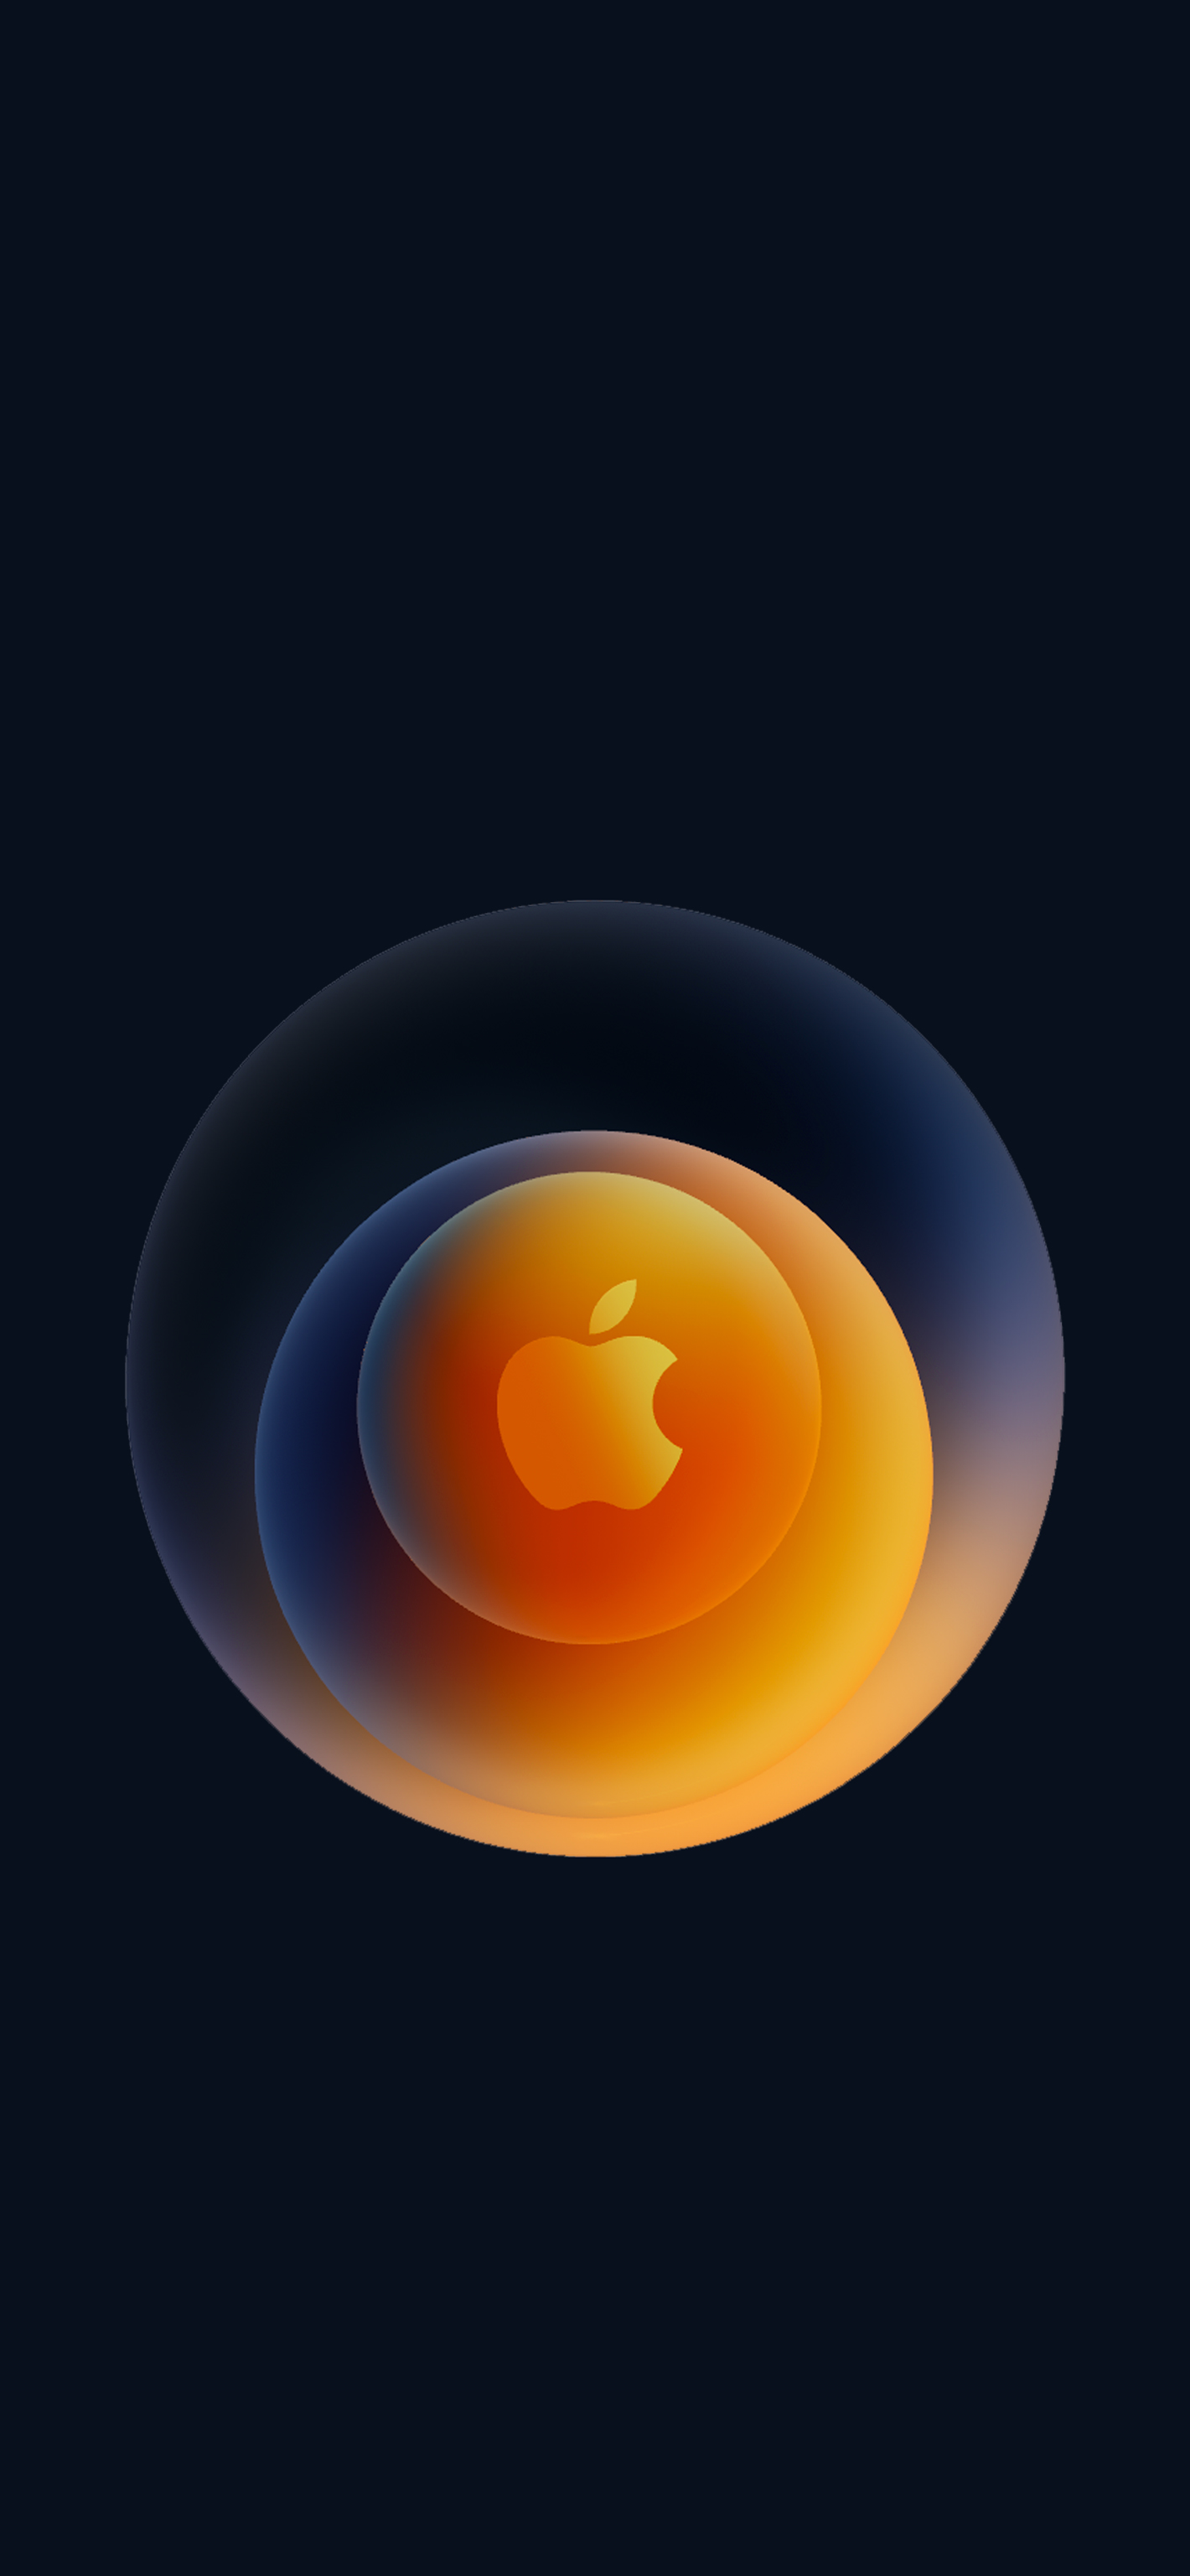 Hi, Speed - Apple Event for iPhone 12 - Official Wallpaper in HQ